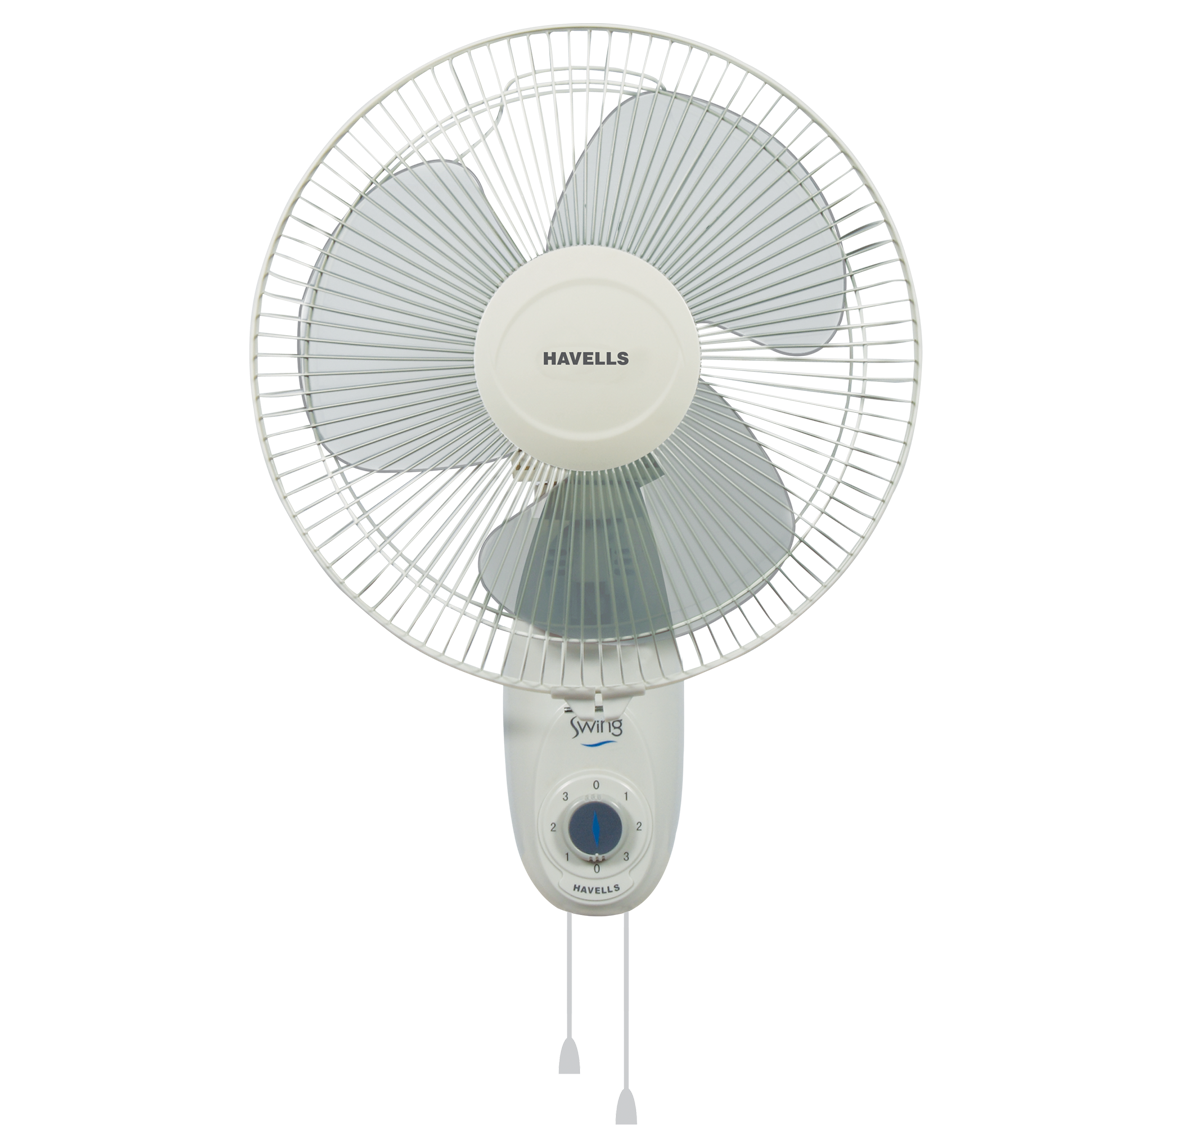 Havells Wall Fans 300mm Off White SWING